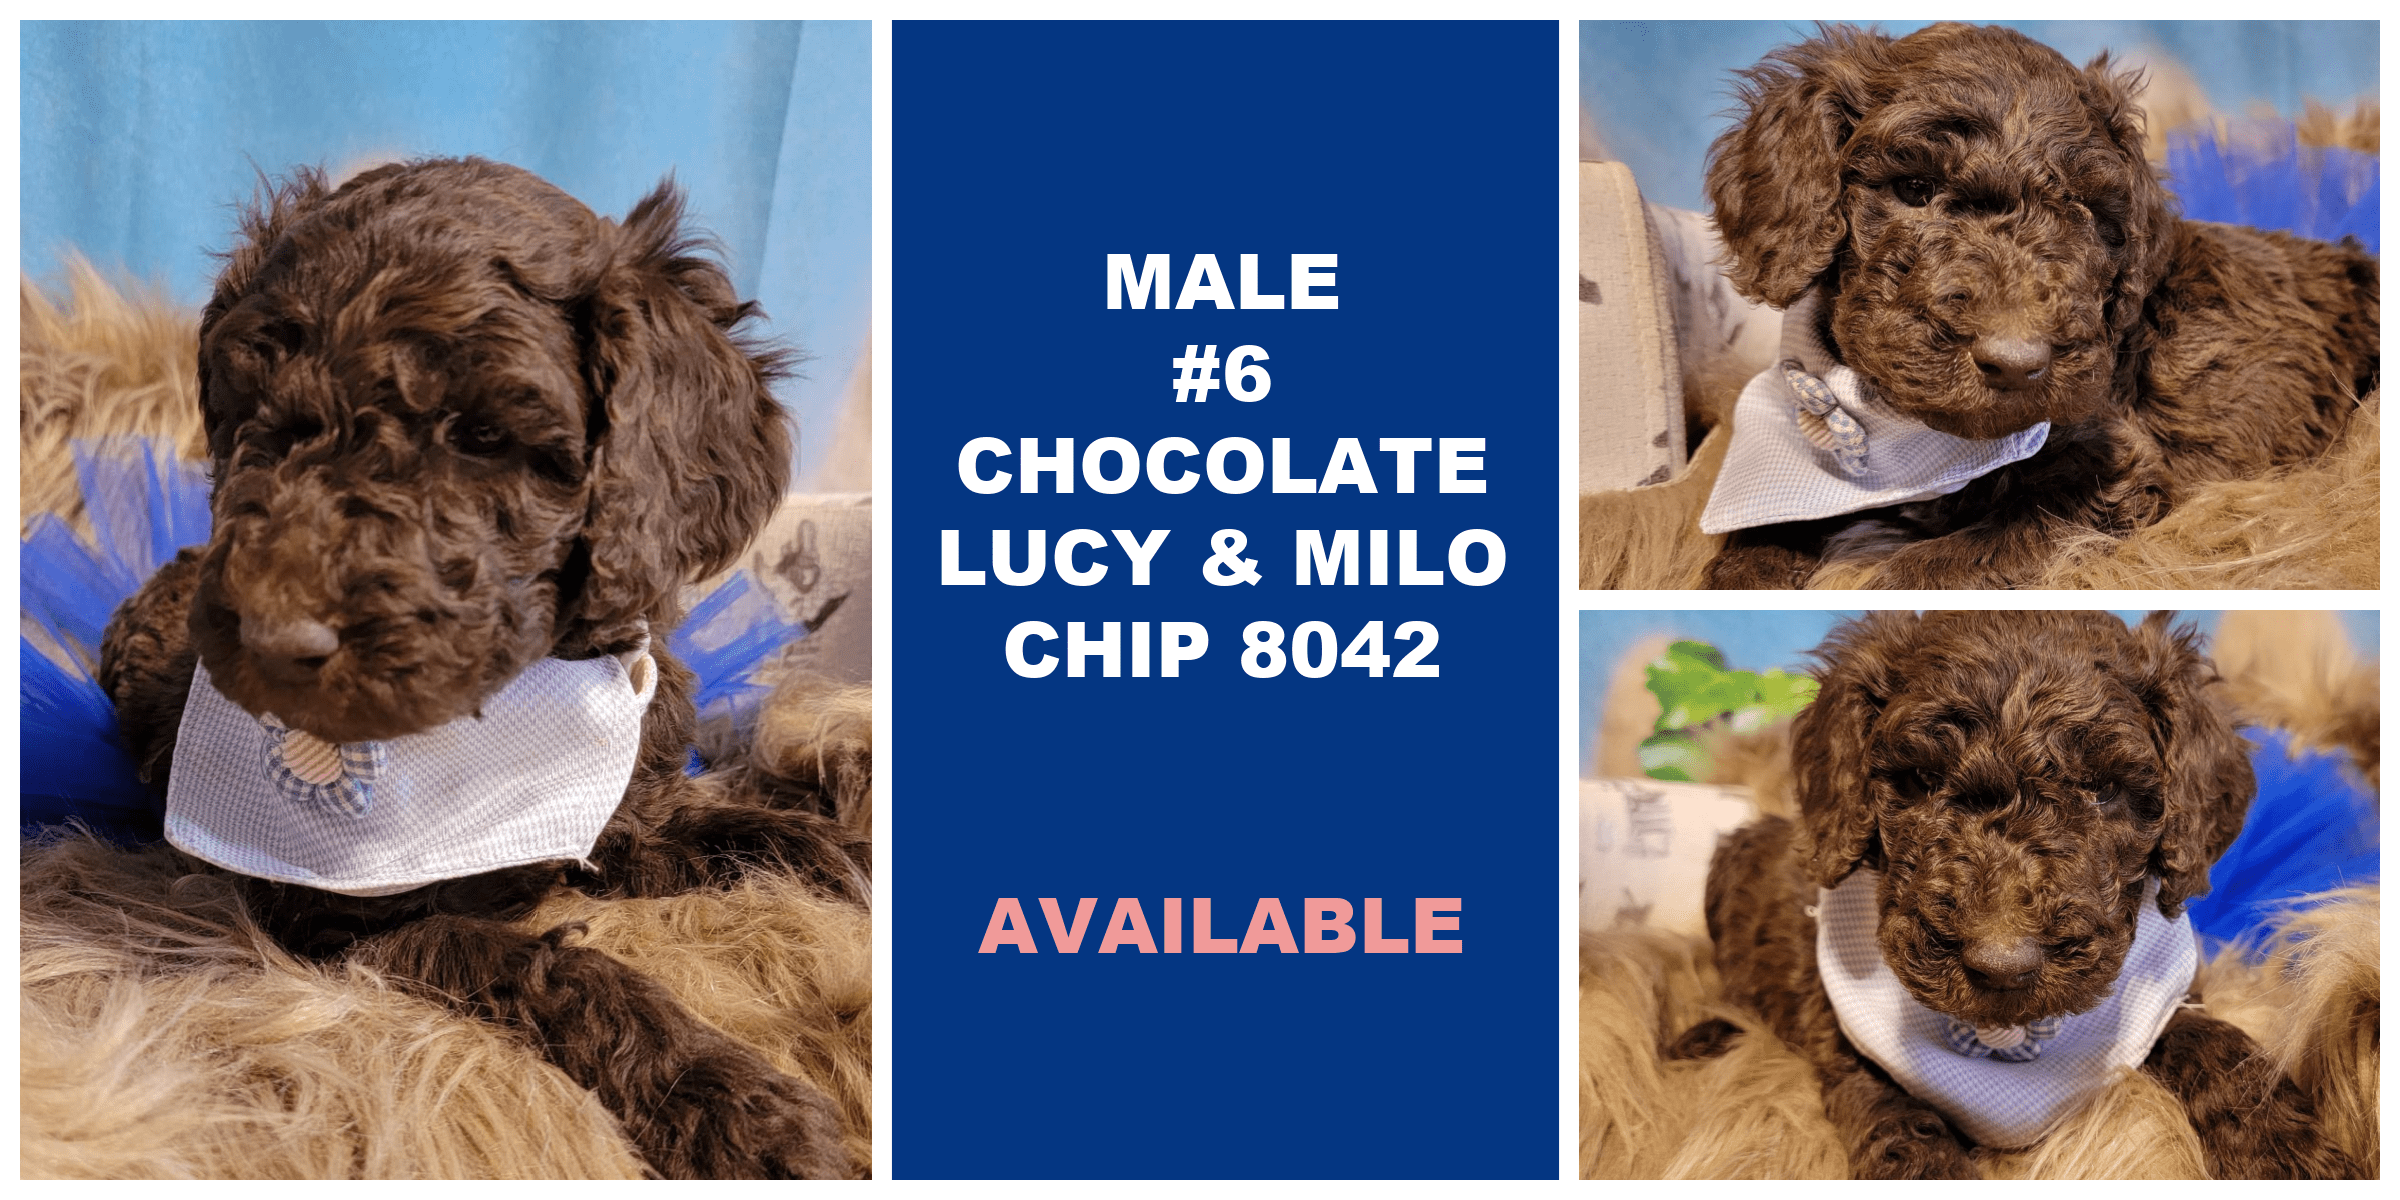 MALE 6 CHOCOLATE LUCY MILO CHIP 8042 AVAILABLE